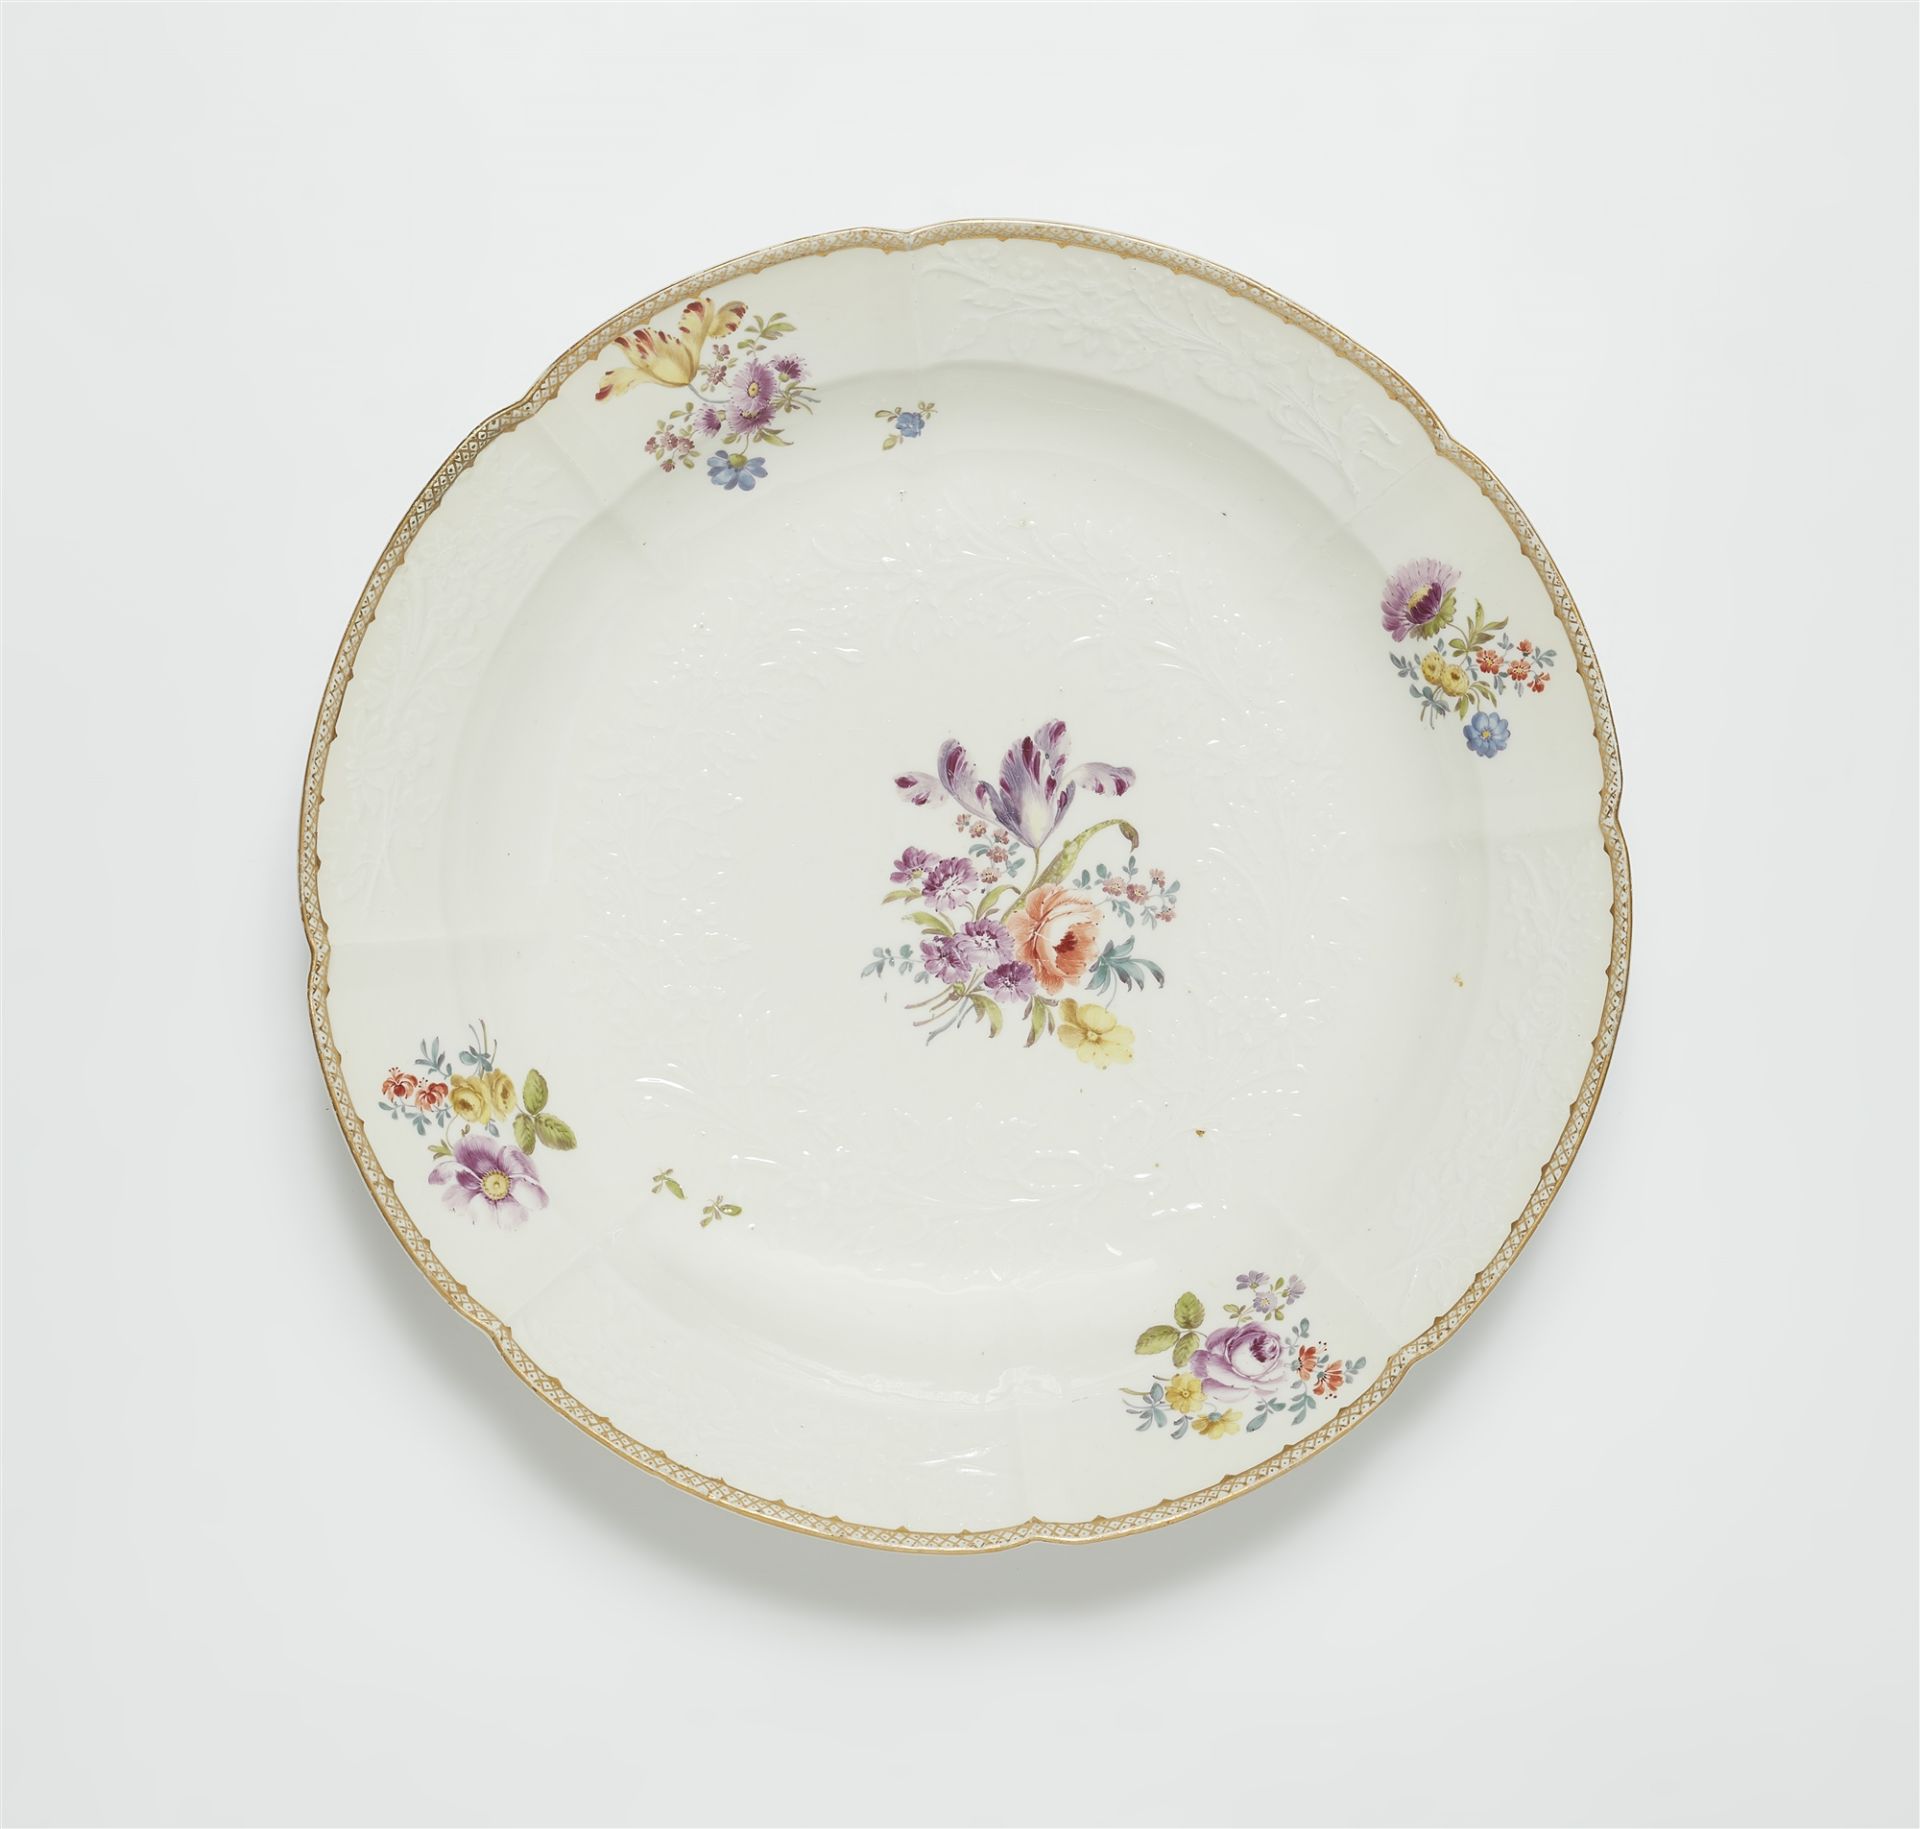 A Meissen porcelain dish from a dinner service with naturalistic flowers